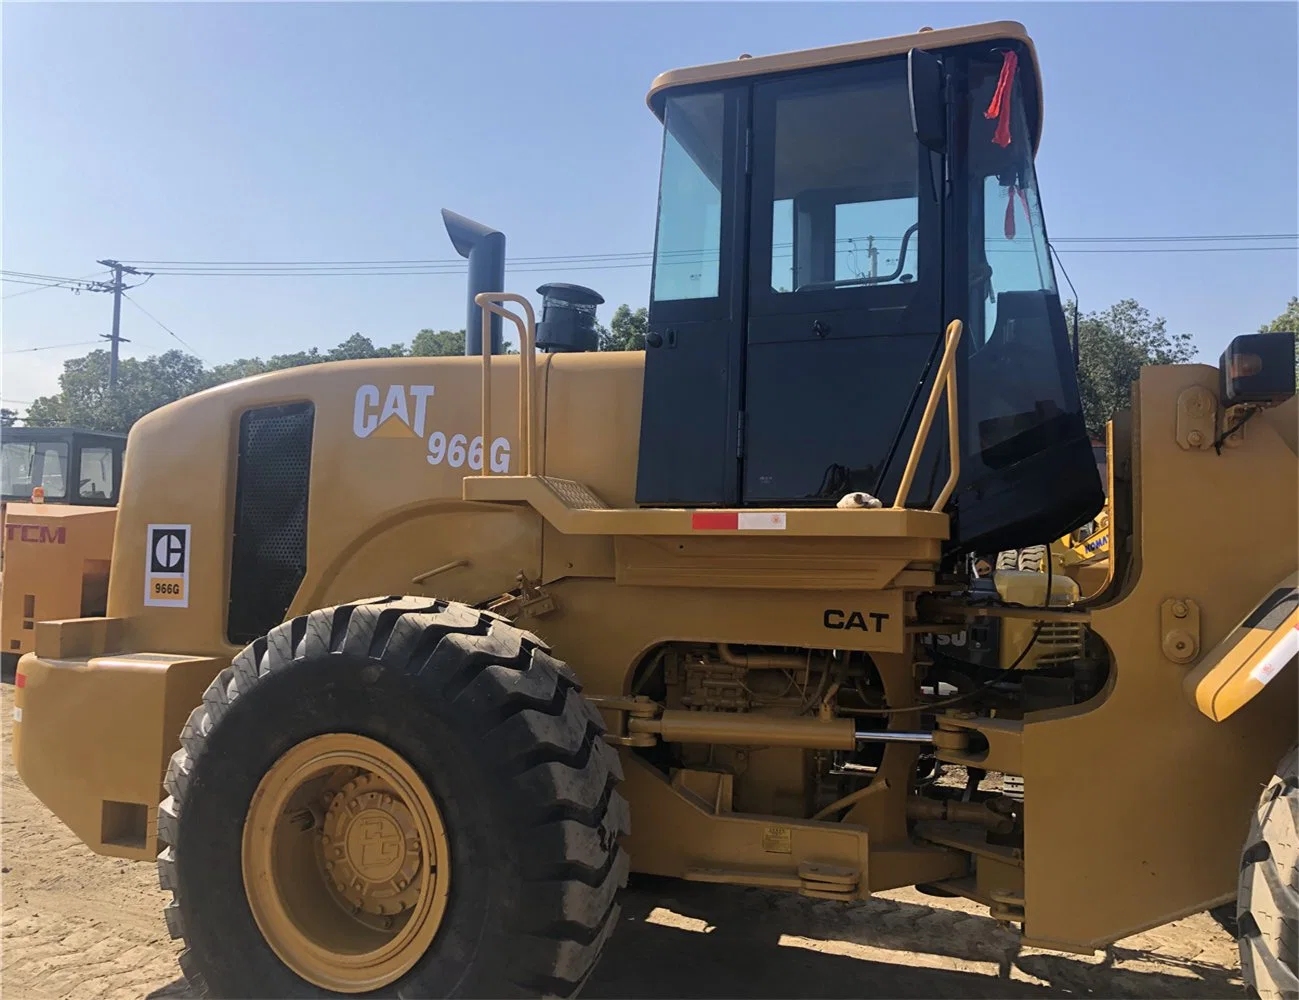 Used 85% Brand New Caterpillar 966g Wheel Loader in Wonderful Working Condition with Reasonable Price. Secondhand Cat Wheel Loader 966c, 966f, 966h on Sale.